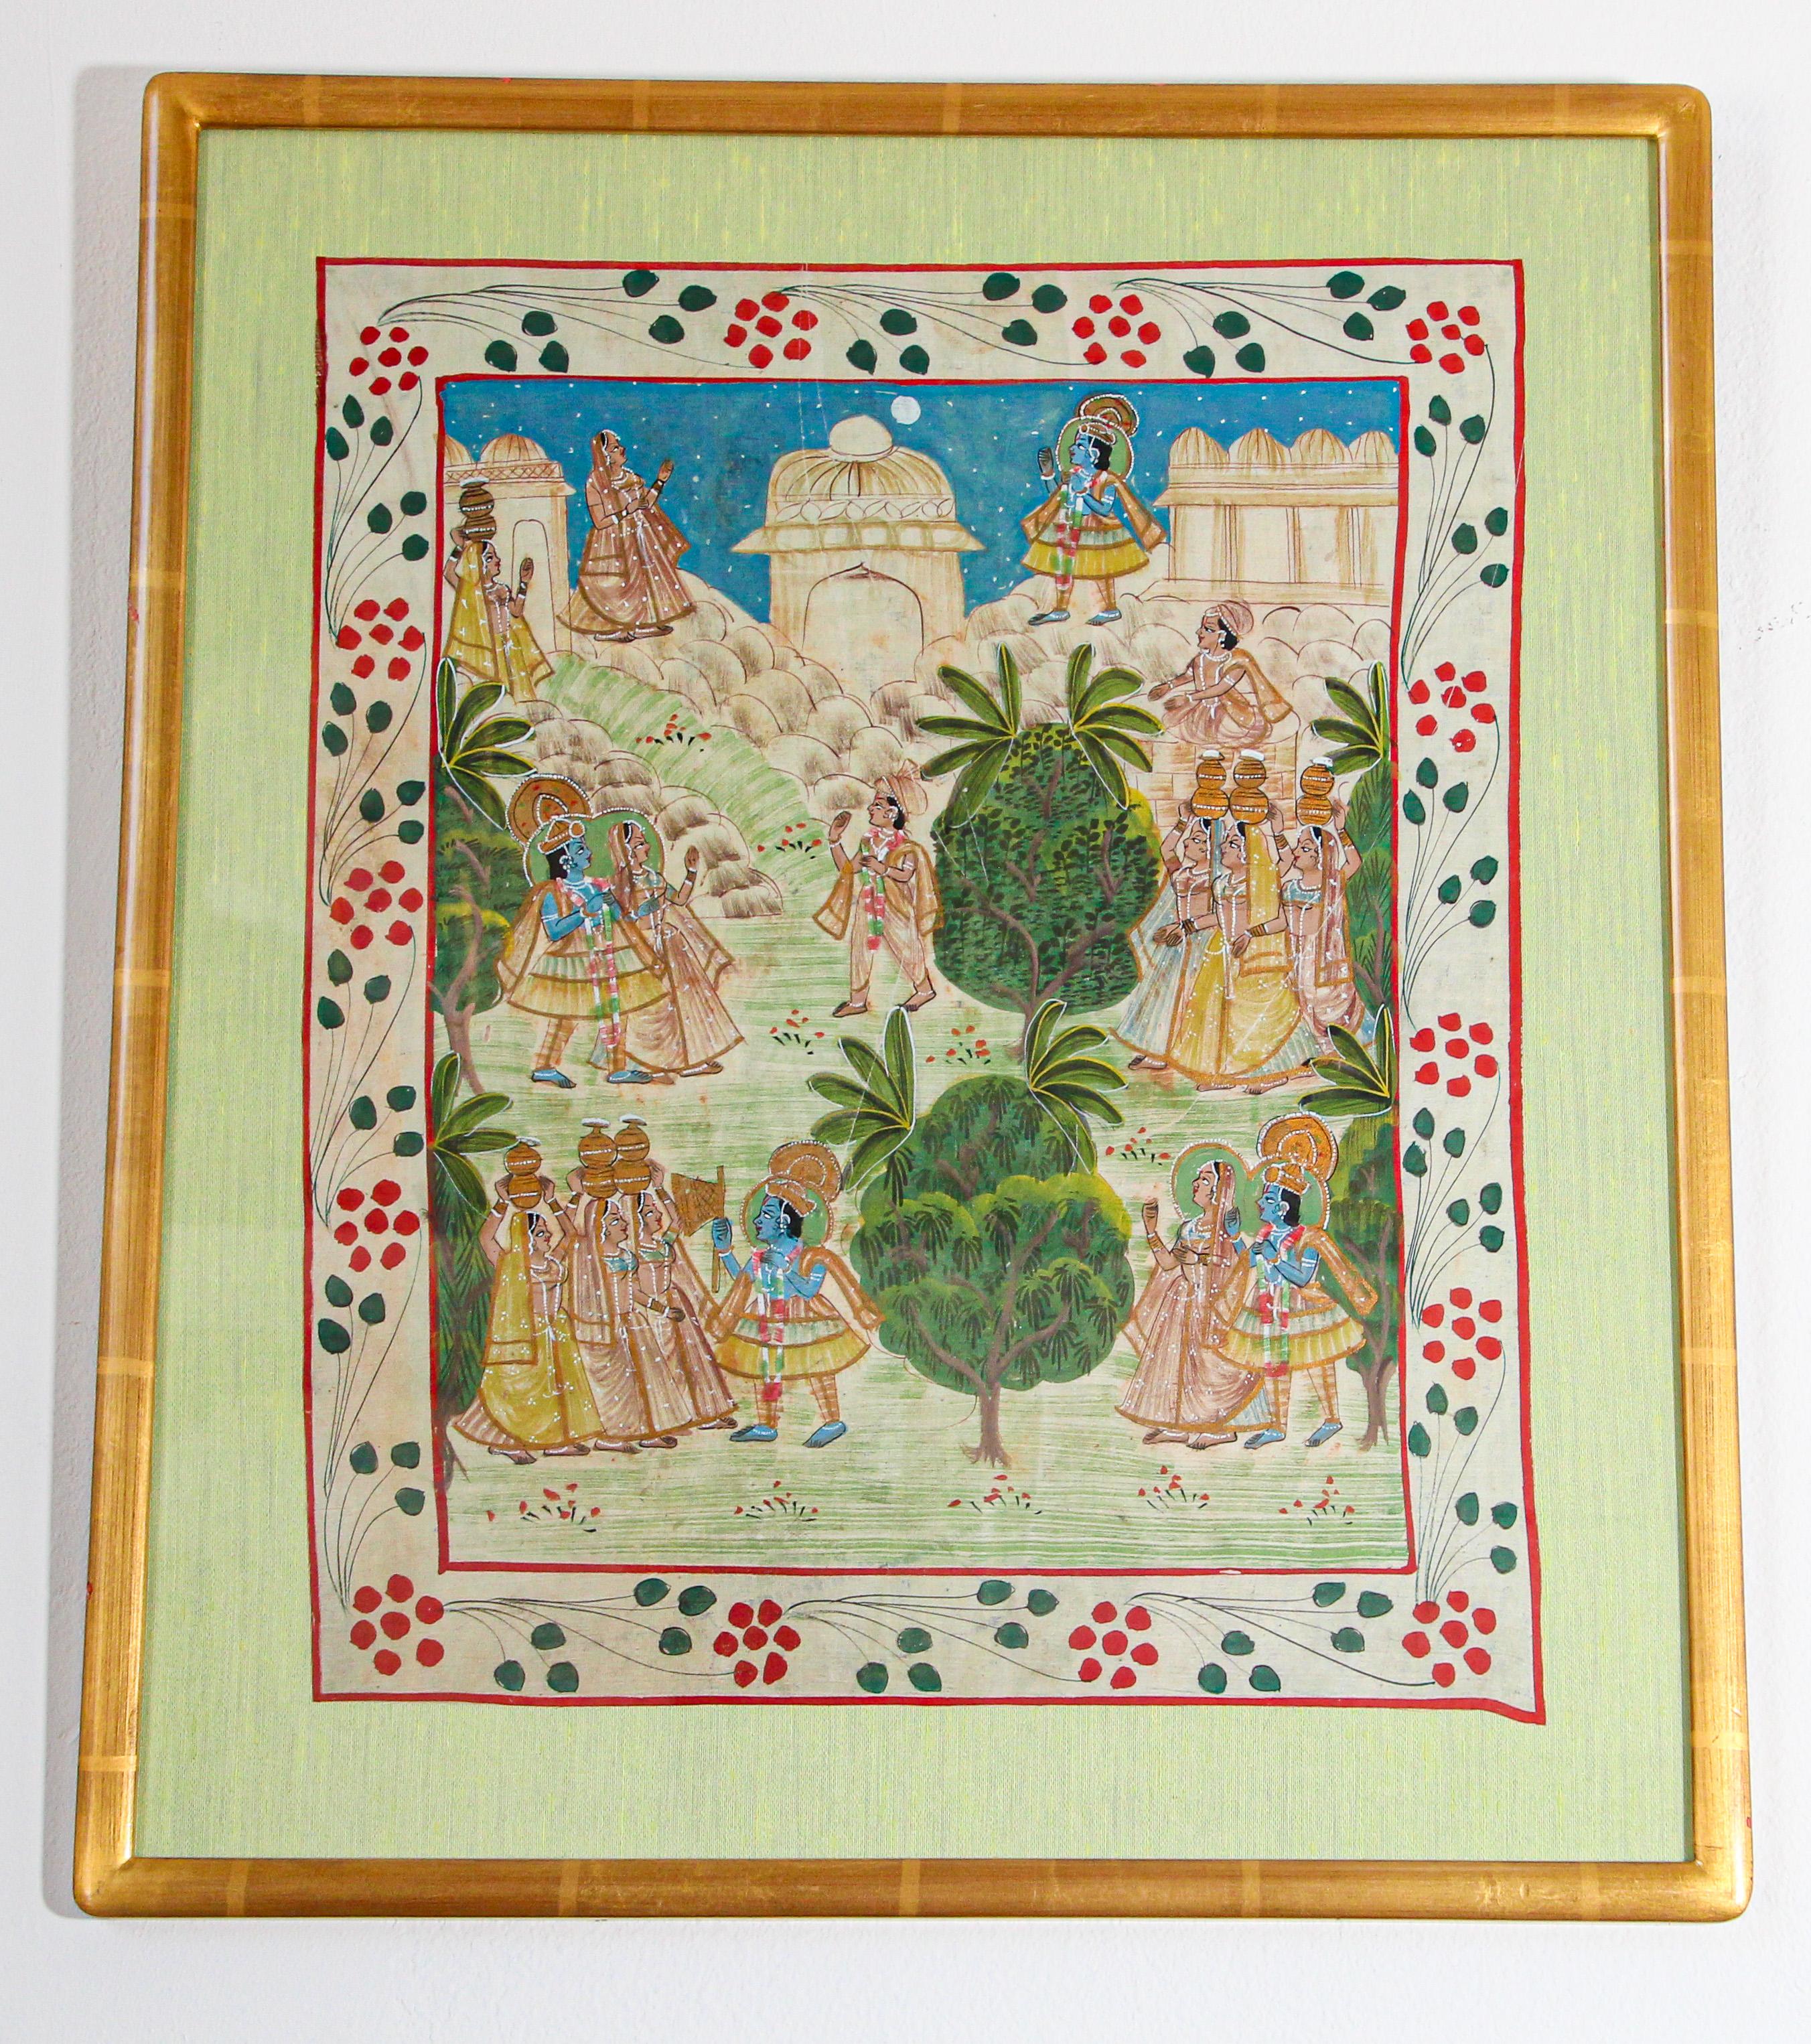 Krishna, Radha, and the Gopis Meet a Young Prince, Picchawai Painting 9